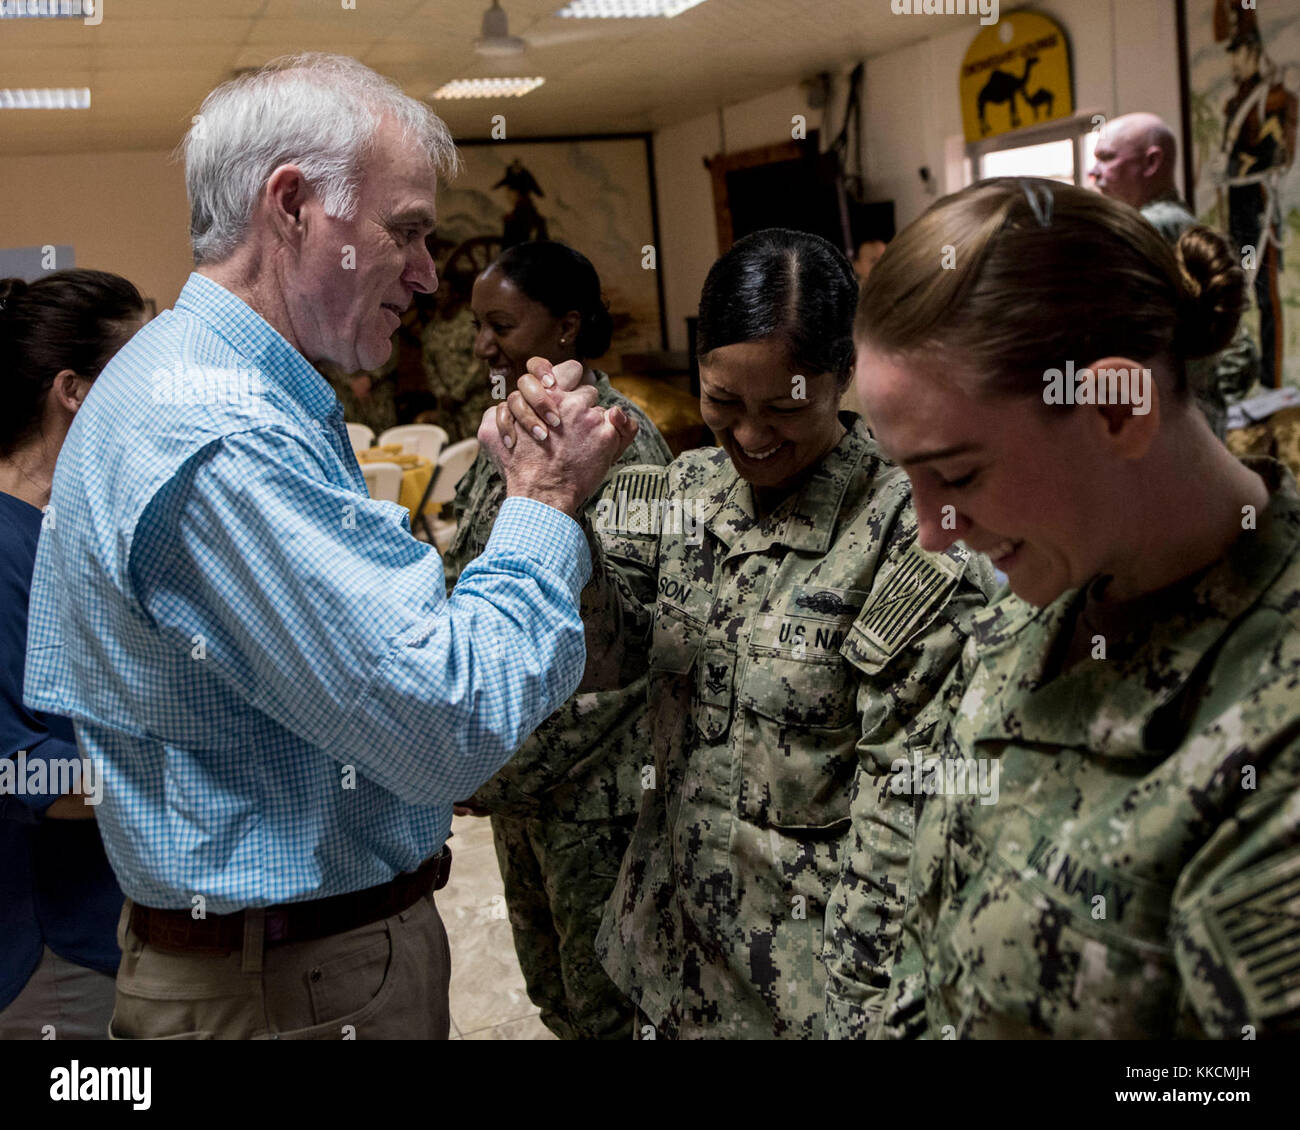 The Secretary of the Navy Richard V. Spencer and his wife, Mrs. Sarah Pauline Finch Spencer, had breakfast with troops and toured Camp Lemonnier’s facilities during a visit to the base, Nov. 24, 2017. While on base, Mrs. Spencer toured the enlisted barracks, Emergency Medical Facility Fitness Center, Navy Exchange and galley. (U.S. Air National Guard photo by Staff Sgt. Allyson L. Manners) Stock Photo